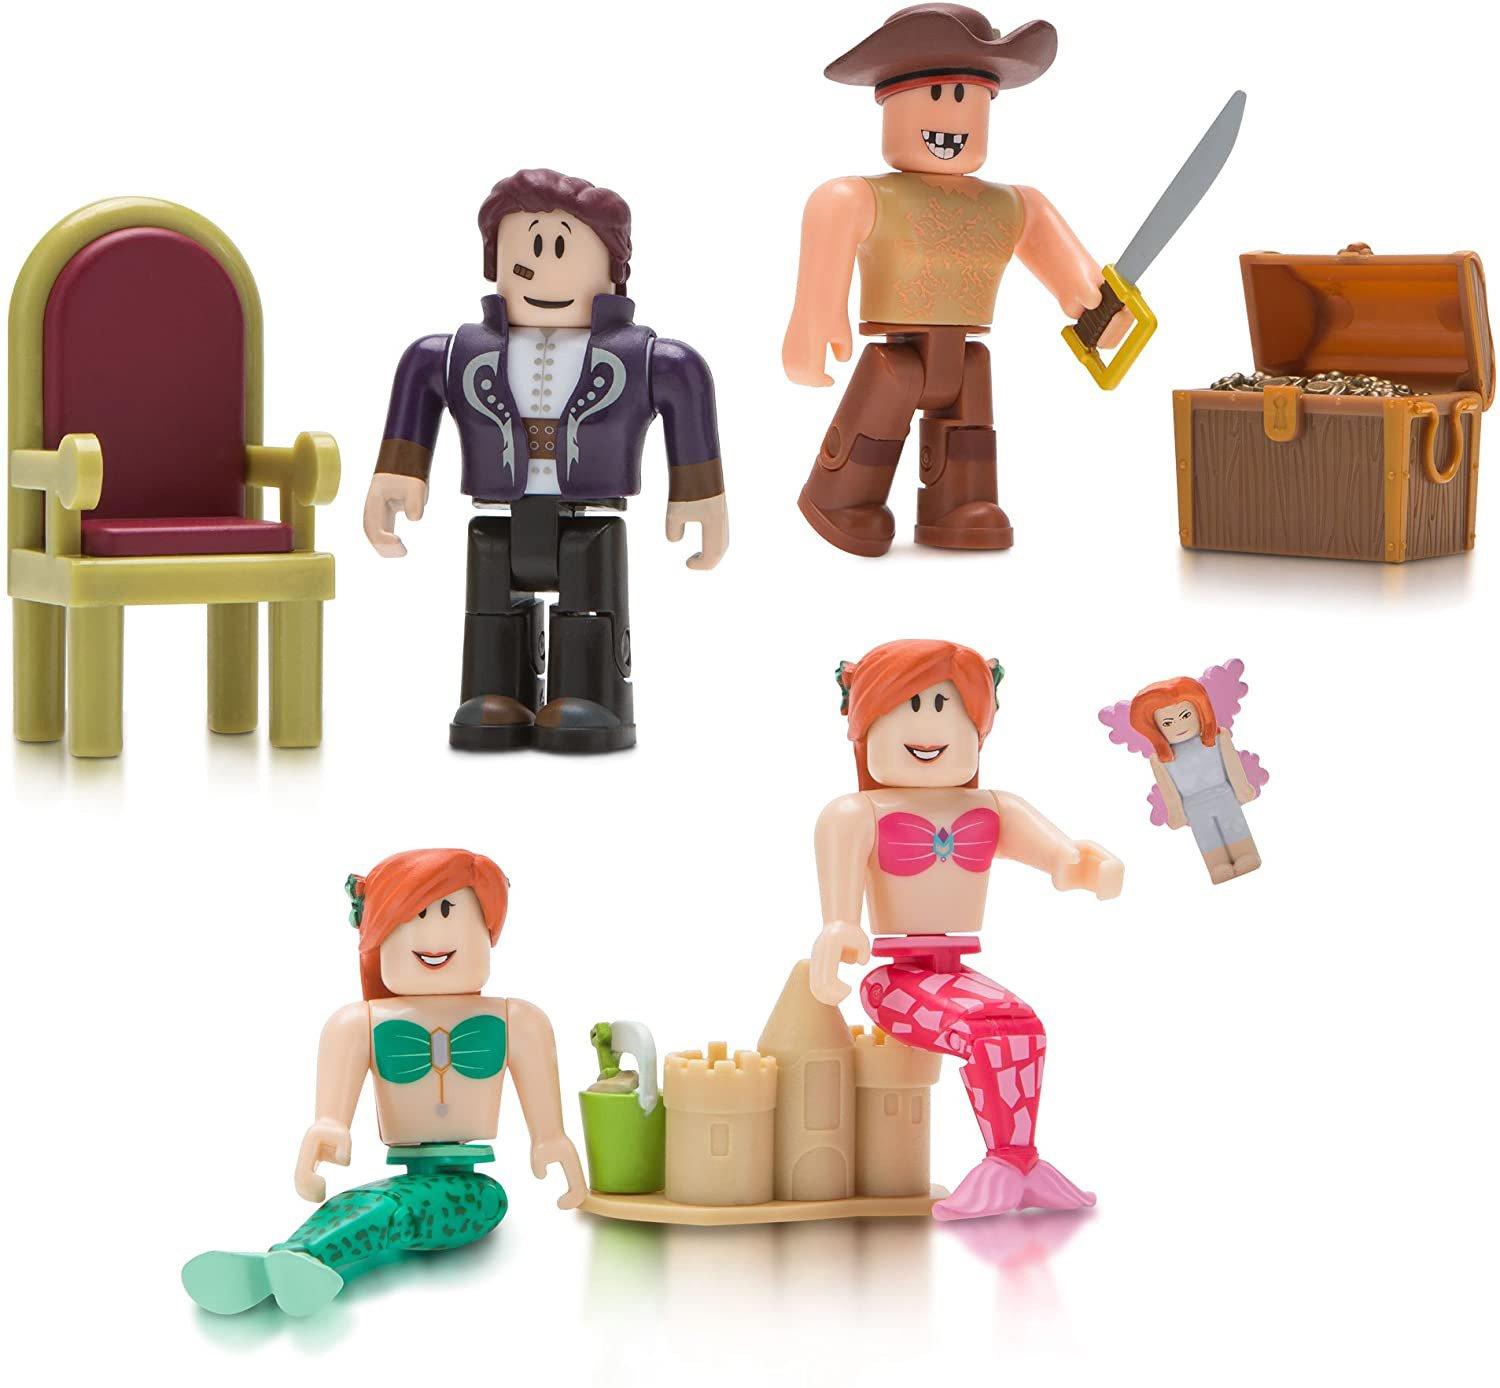 Roblox Celebrity Collection Neverland Lagoon Four Figure Pack - roblox adventures baby meets a mermaid neverland lagoon